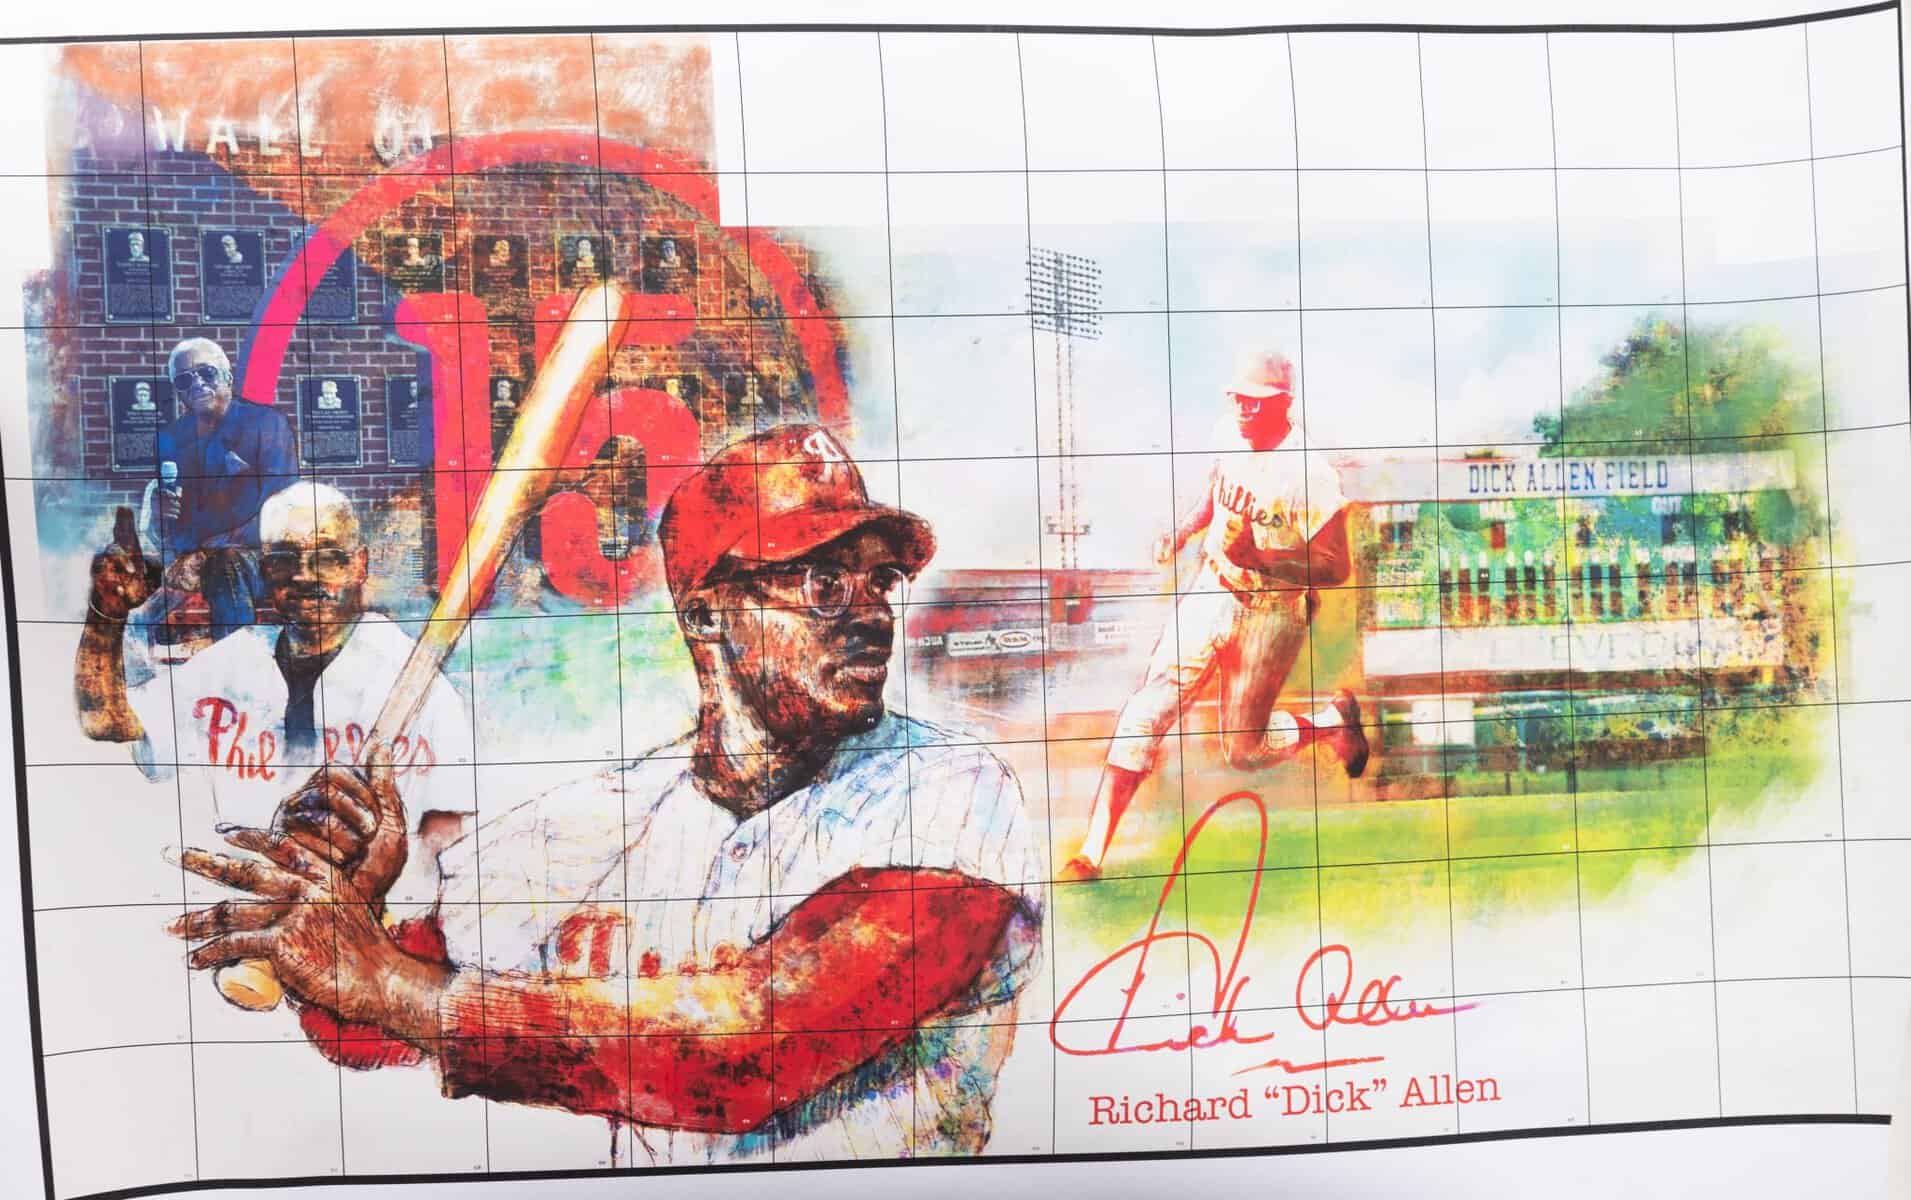 Dick Allen mural coming to South Broad